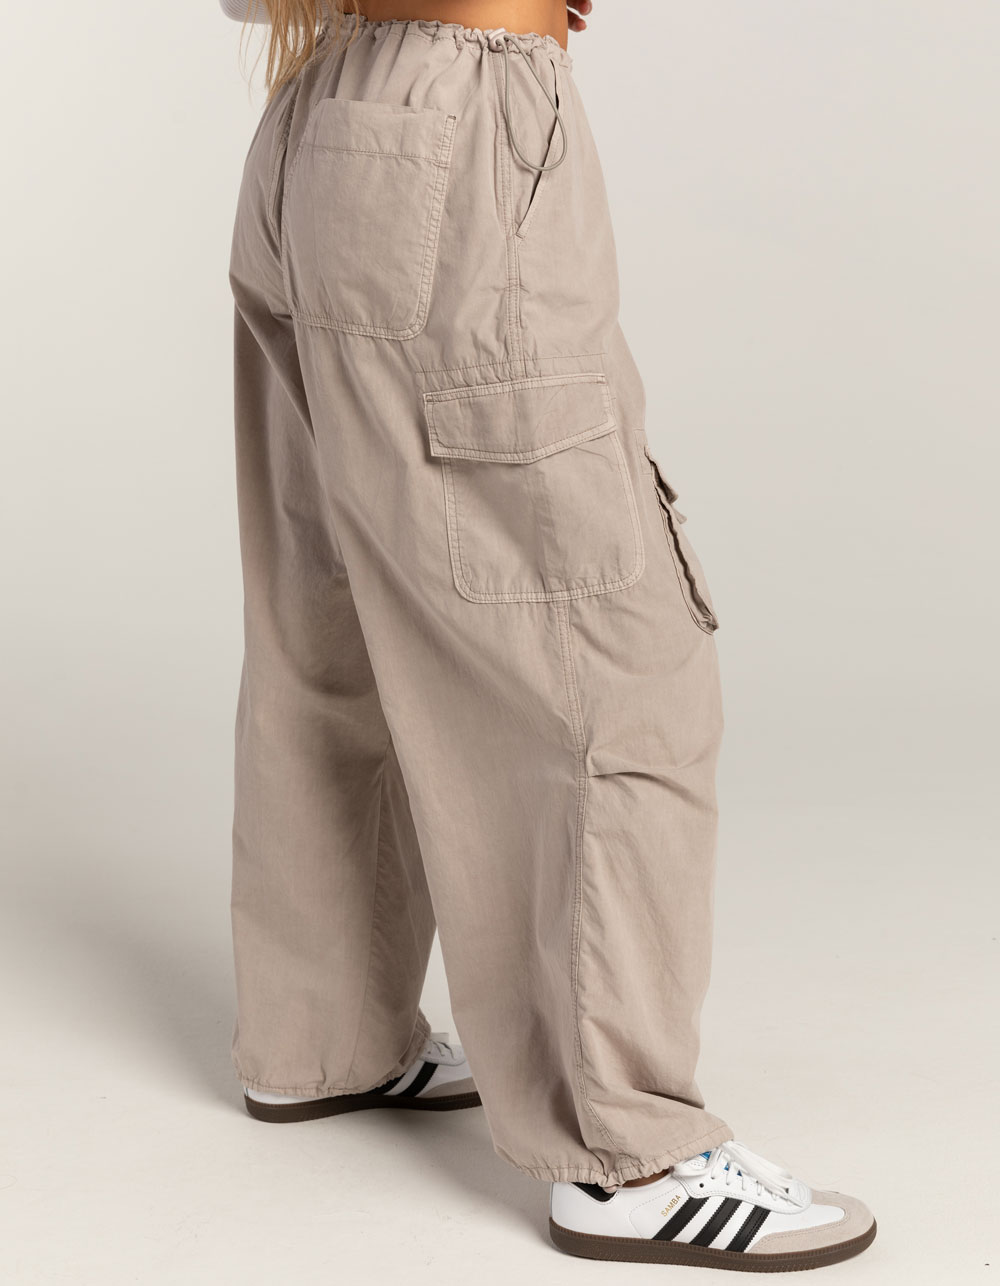 Tillys Womens Outfitters Pocket BDG Pants Tech | Urban STONE - Maxi